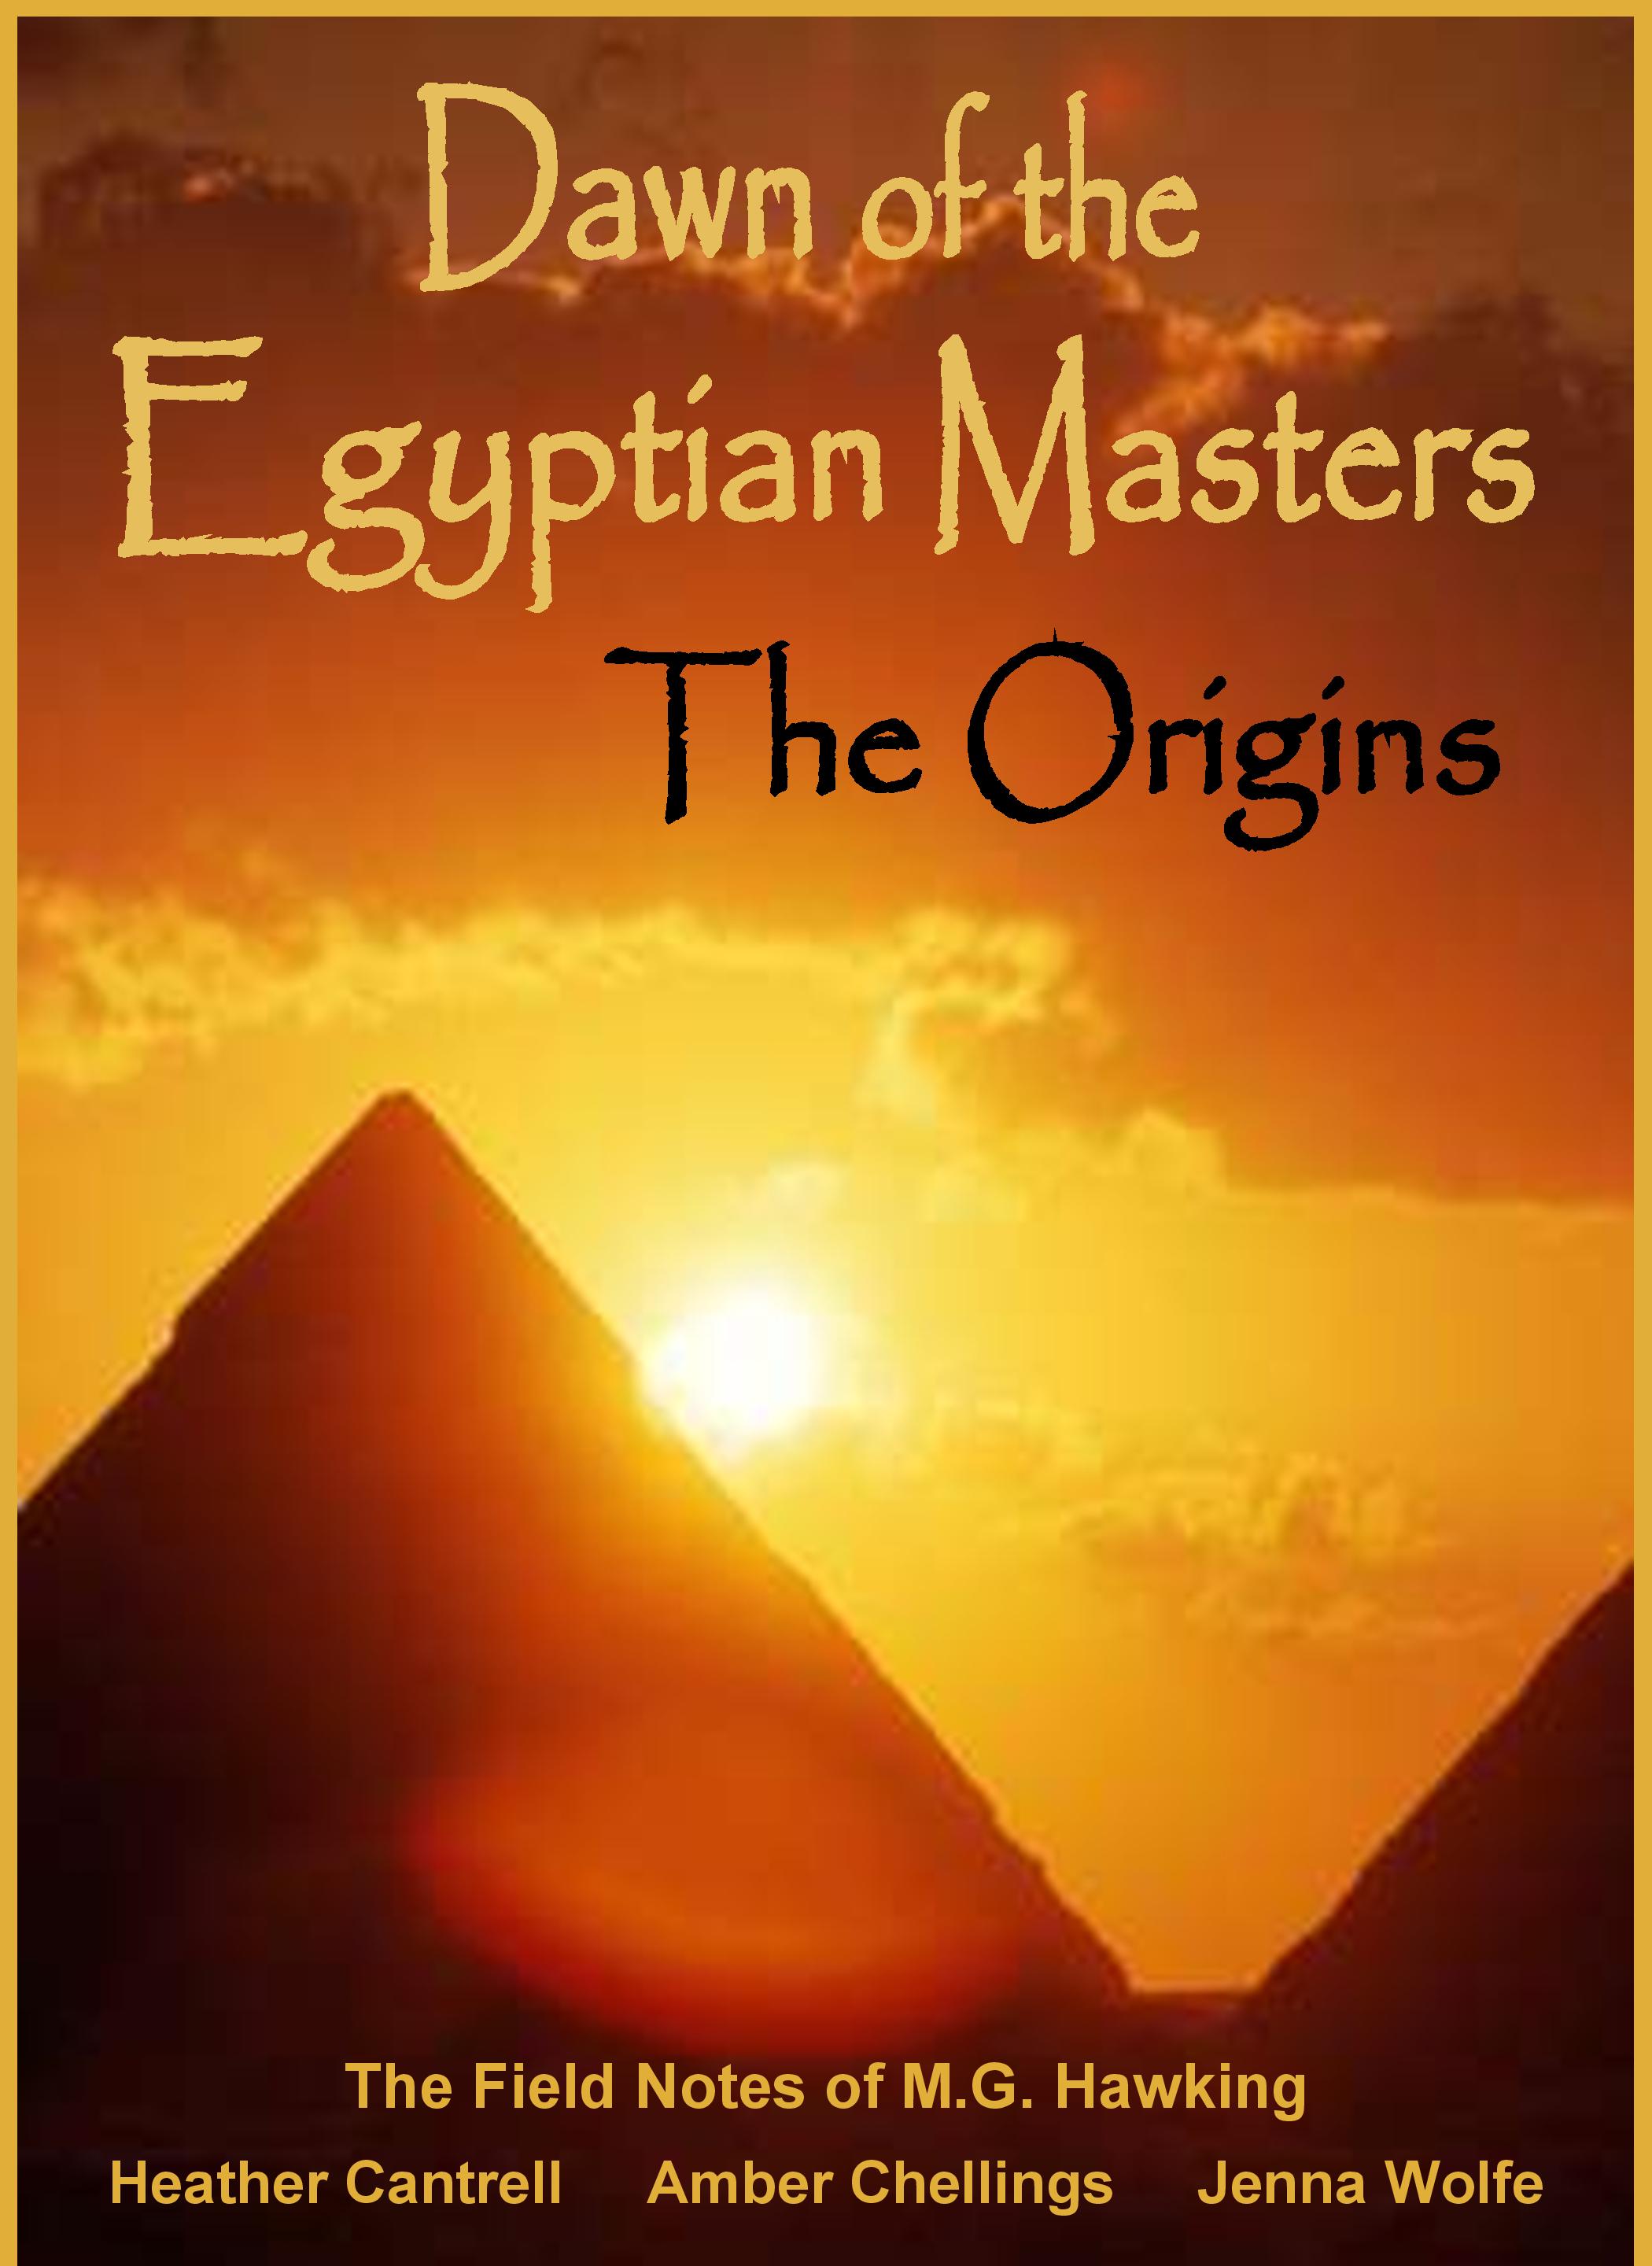 FREE: Dawn of the Egyptian Masters, The Origins by M.G. Hawking, Jenna Wolfe Ph.D